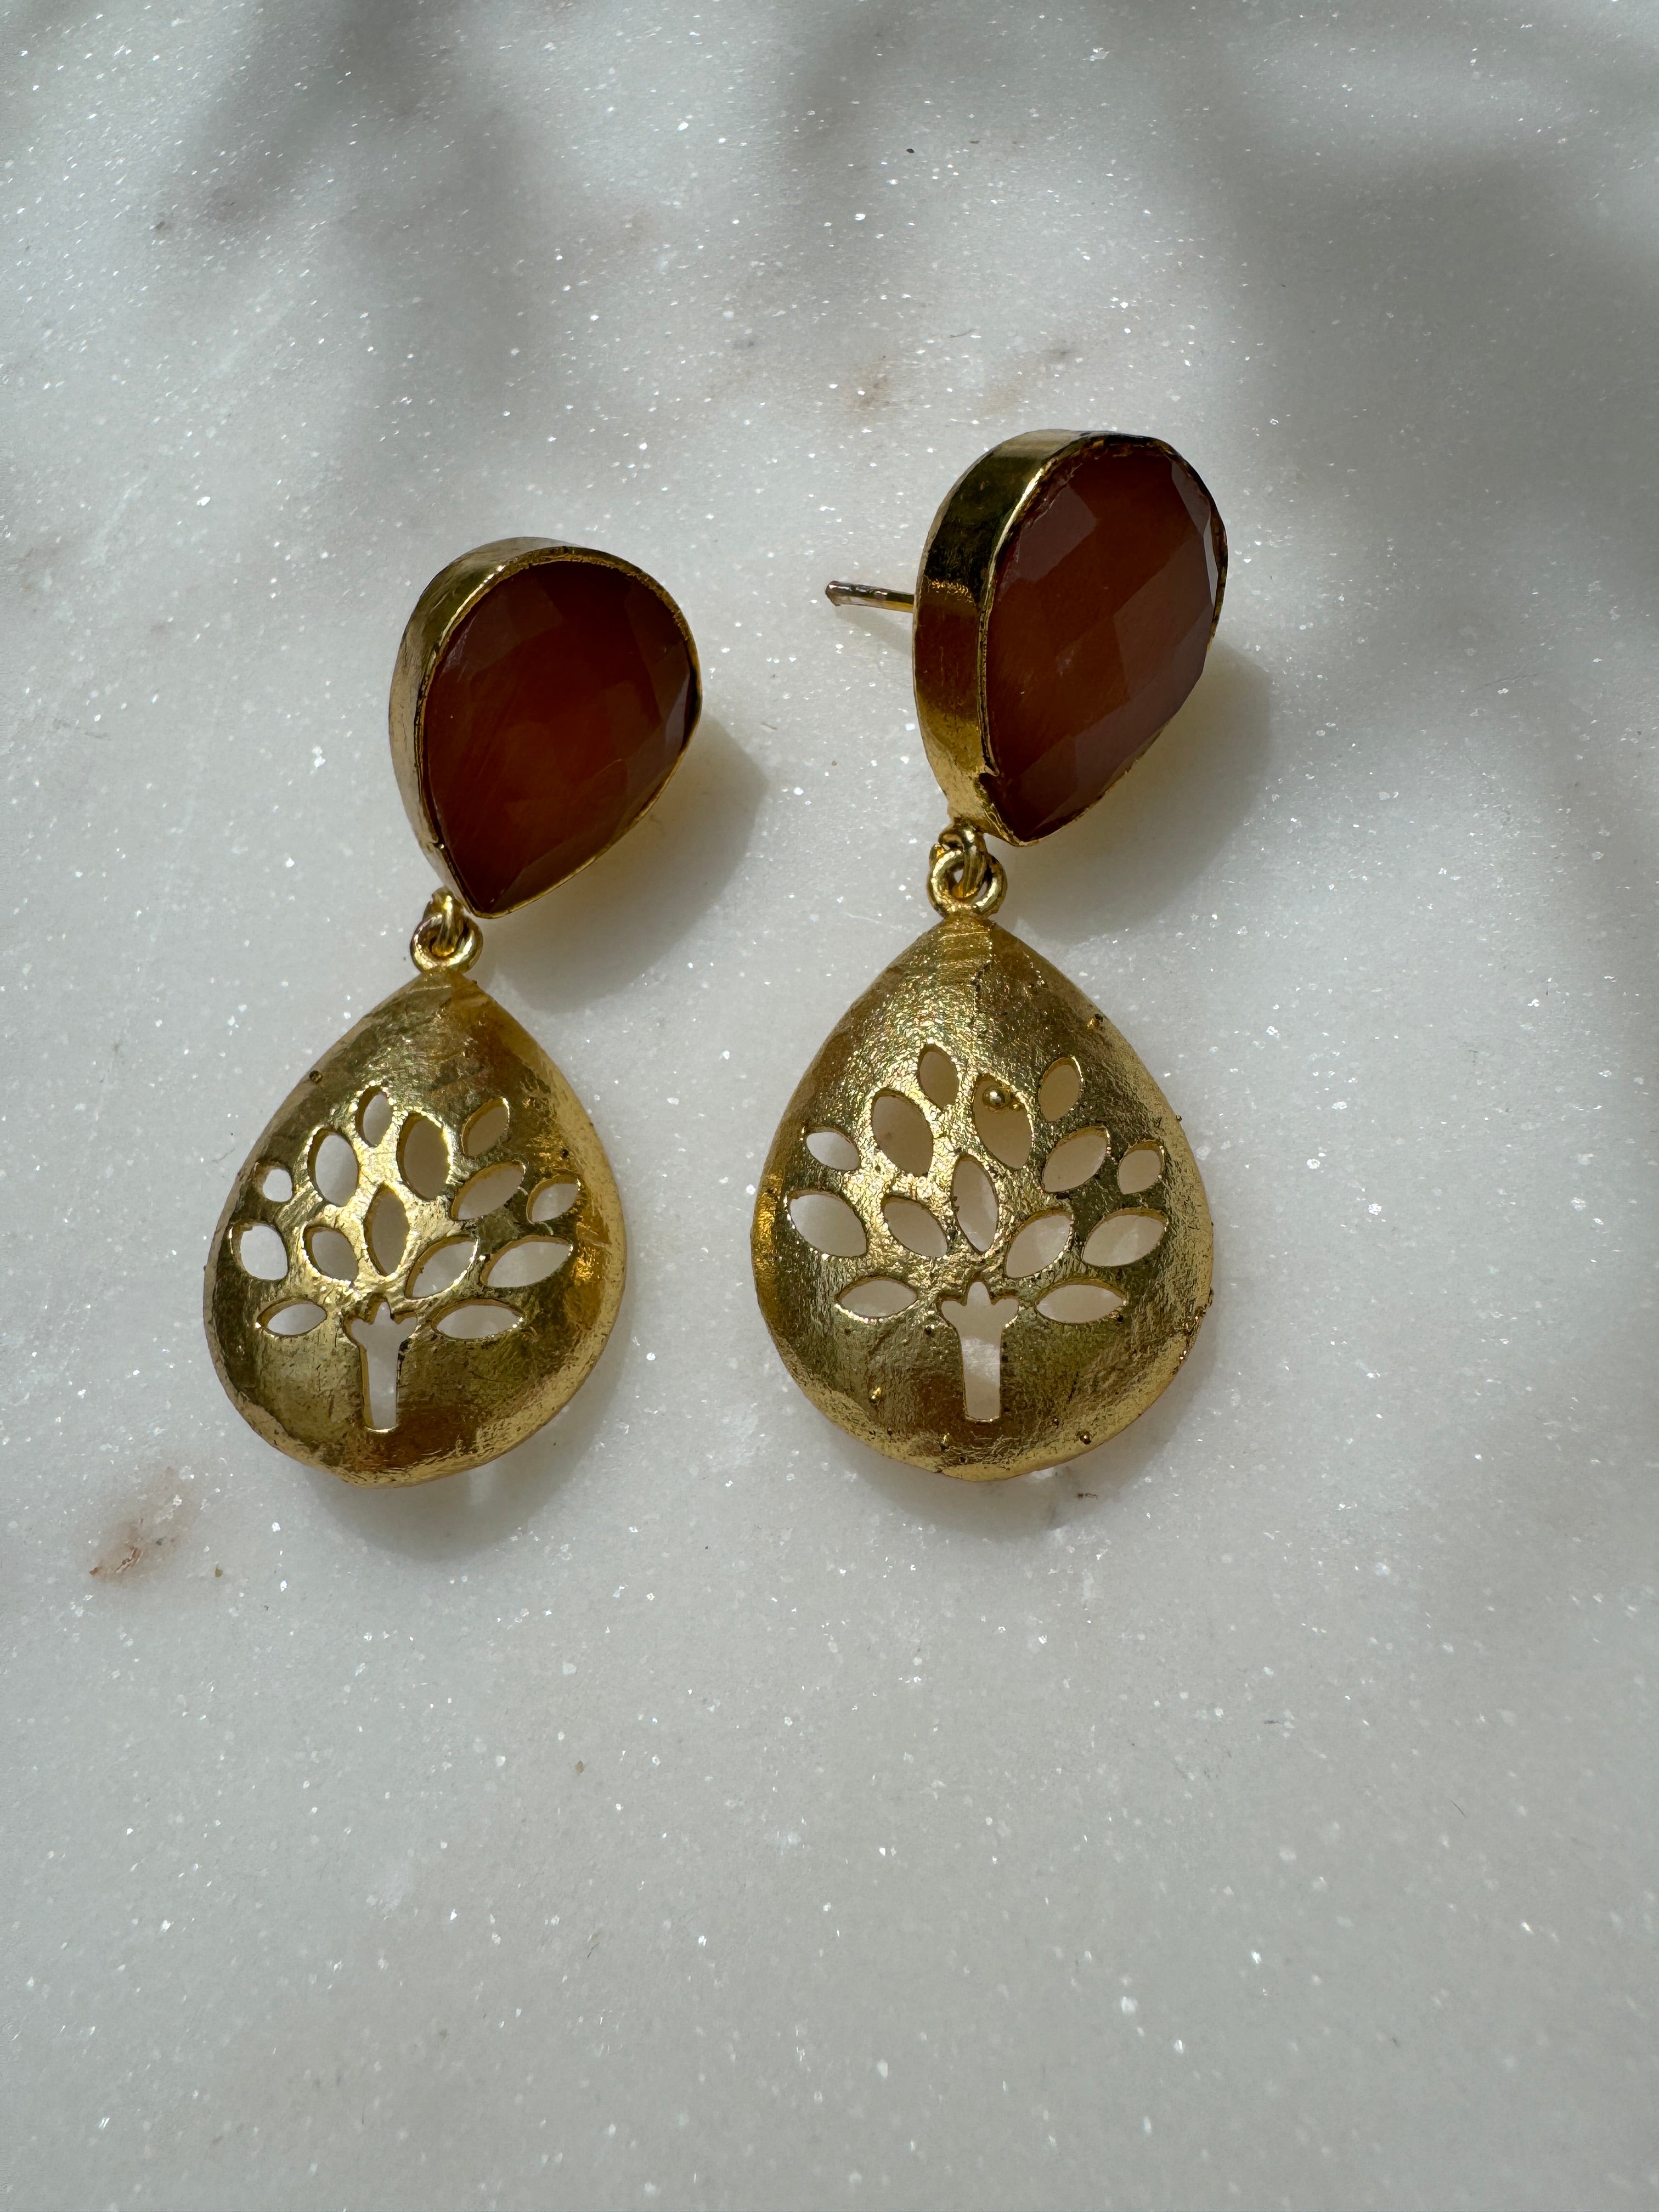 Future Nomads Earrings Calcite & Crystal Earrings Tree Of Life